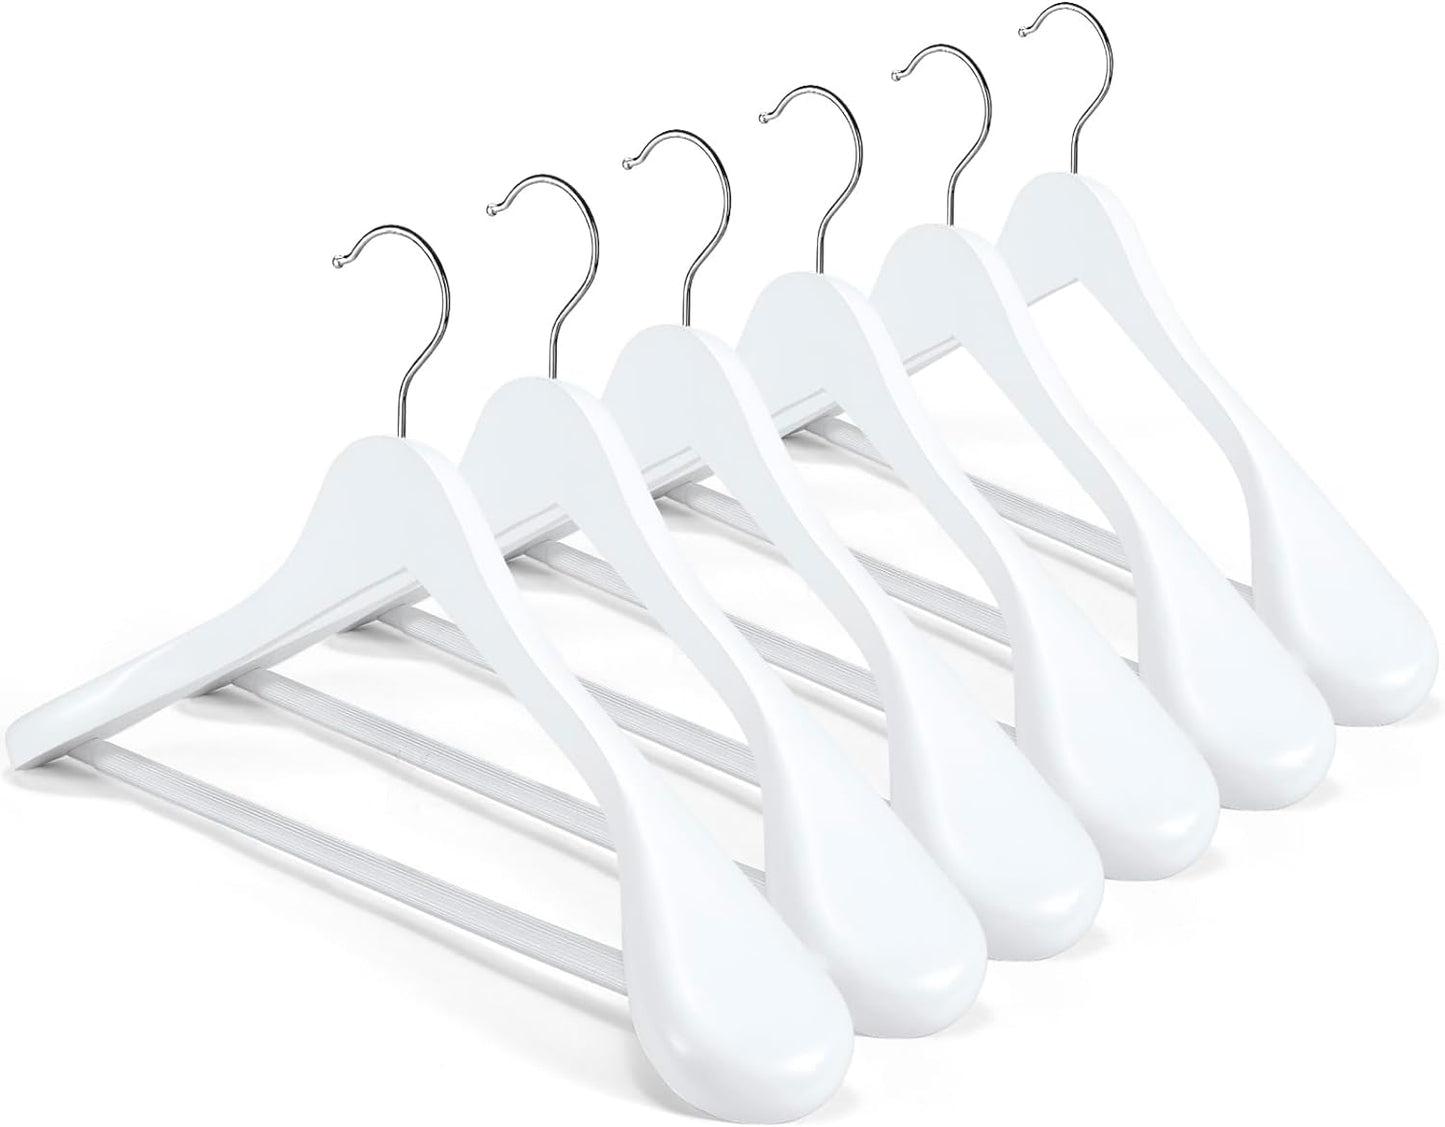 HOUSE DAY 17.7 Inch Solid Wood Coat Hangers White 6 Pack